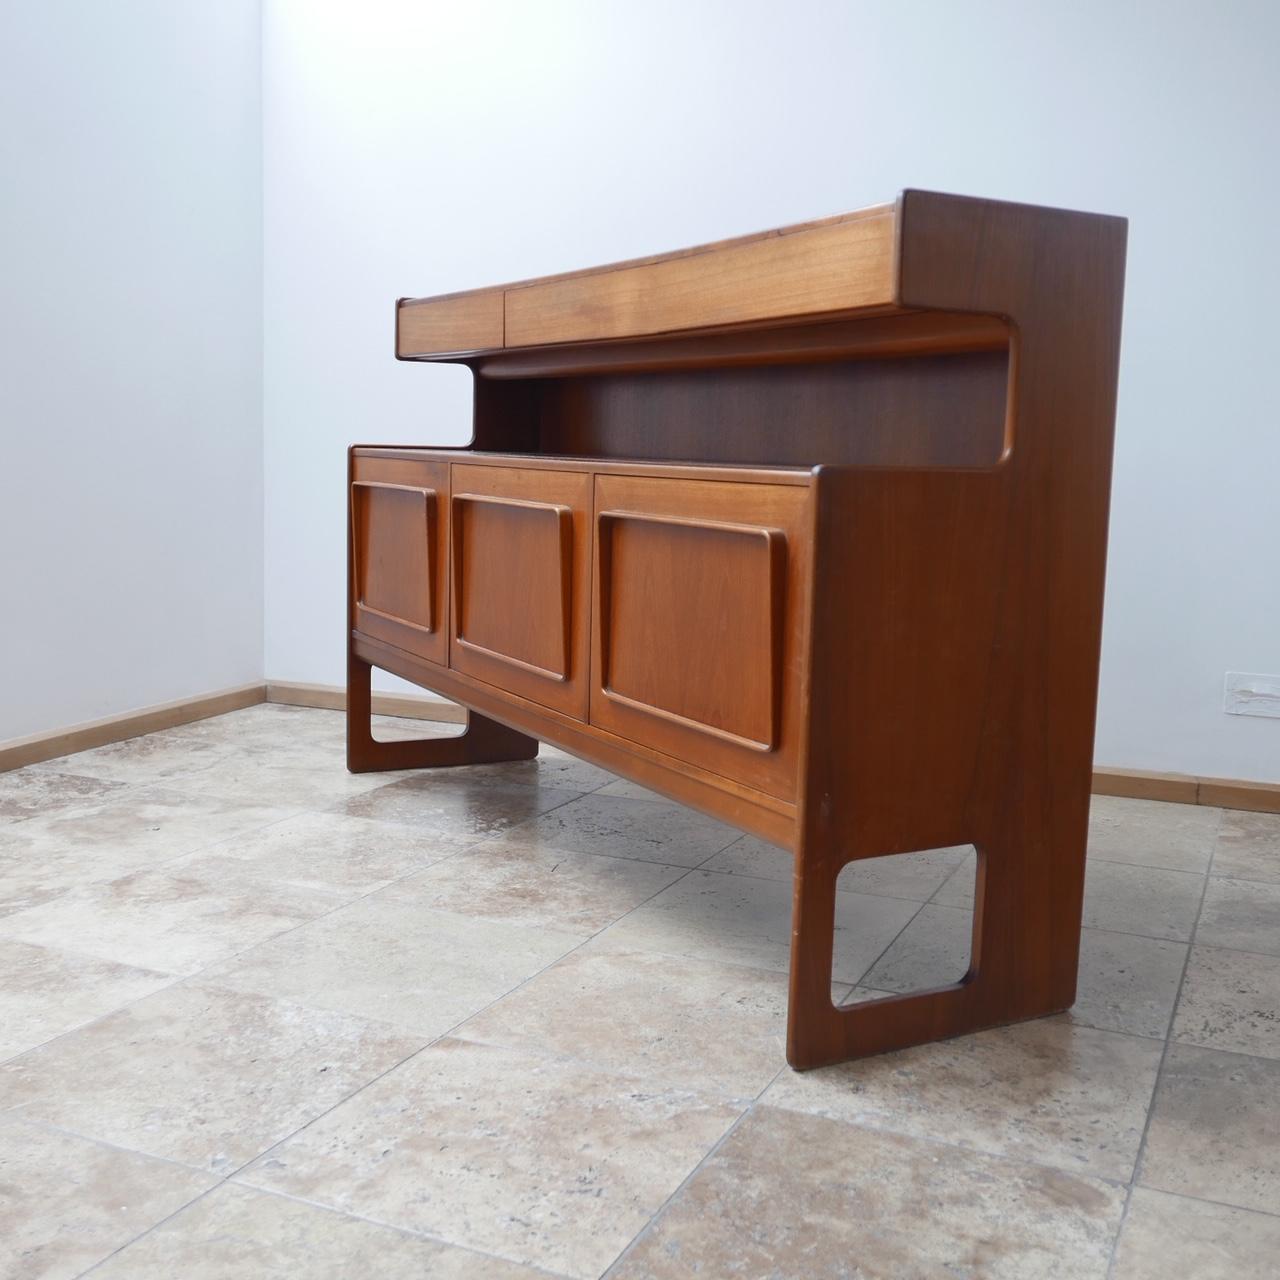 A rare sideboard by McInstosh. 

Late 1960s-1970s. 

Scottish, UK. 

Three drawers top tier over three lower cabinets. 

Highly functional. 

Perfect to put a tv over as an example with the drawers for remotes and the cabinets for boxes